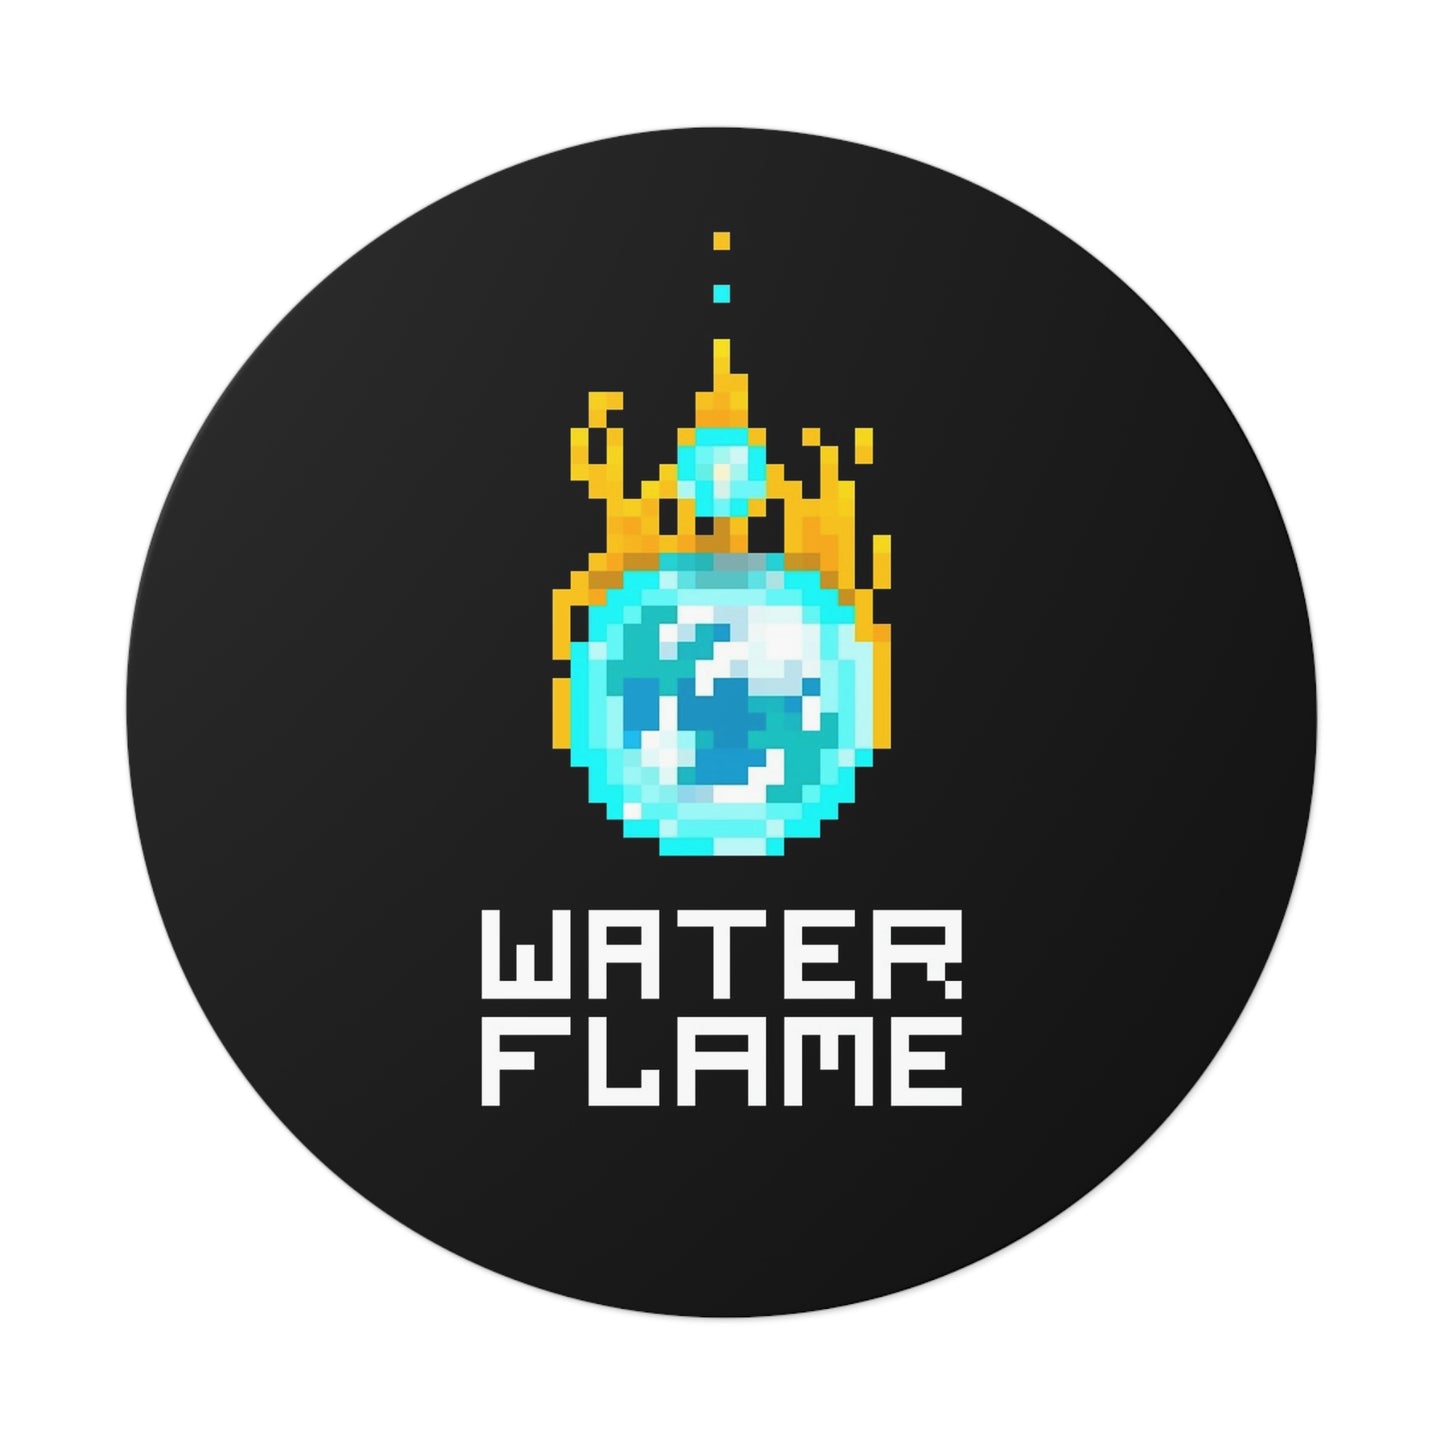 Waterflame Sticker